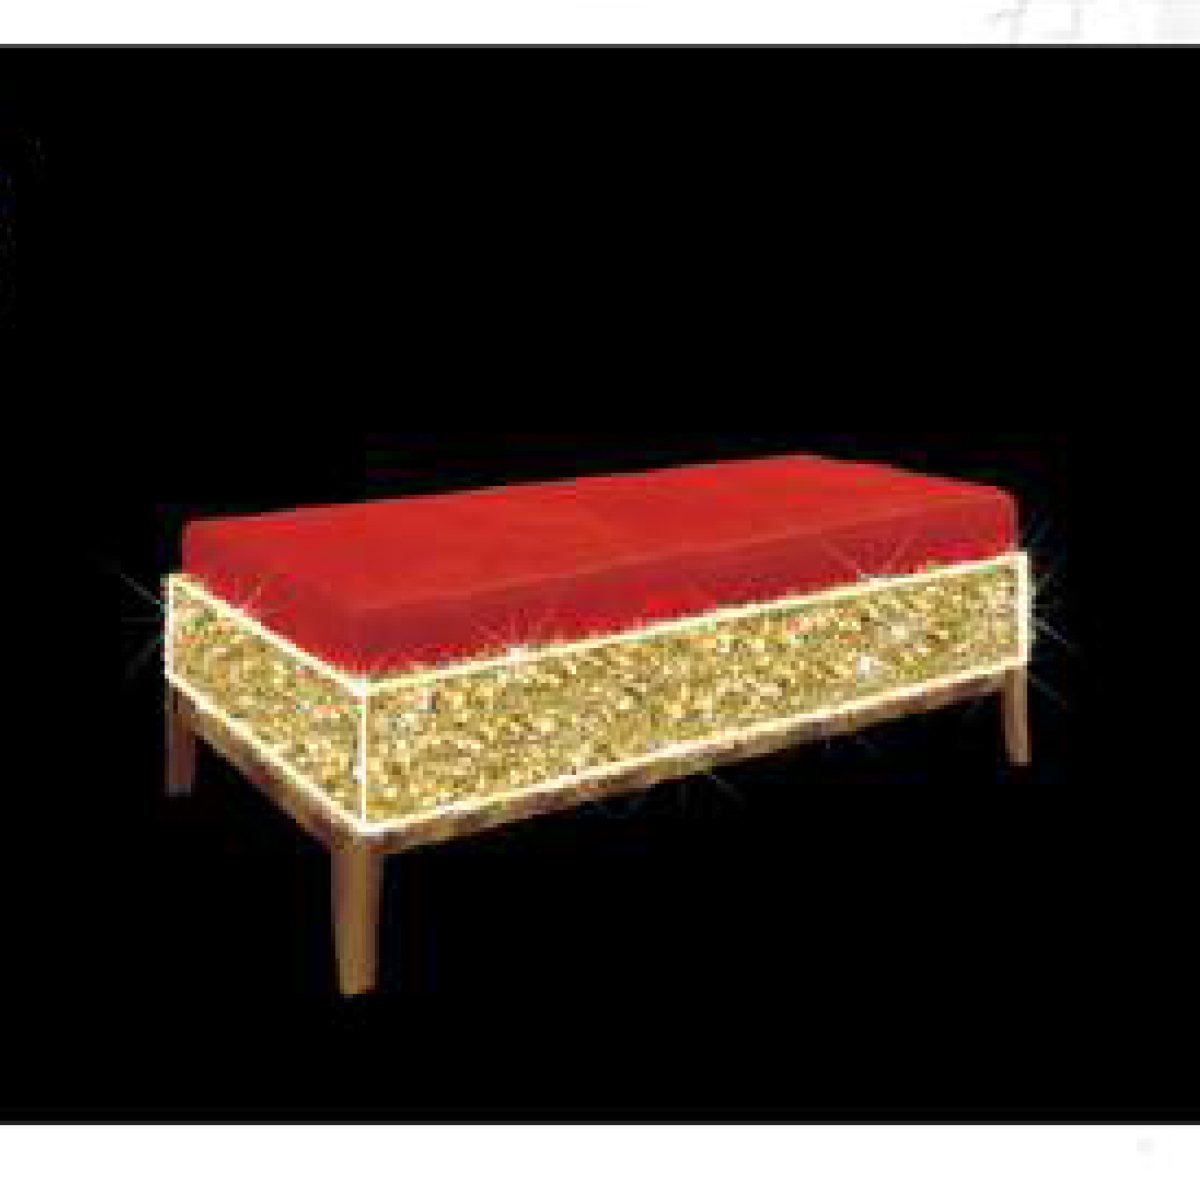 3D Gold Bench - Large Commercial Display - Red Cushion - LED Lights - 40” Long